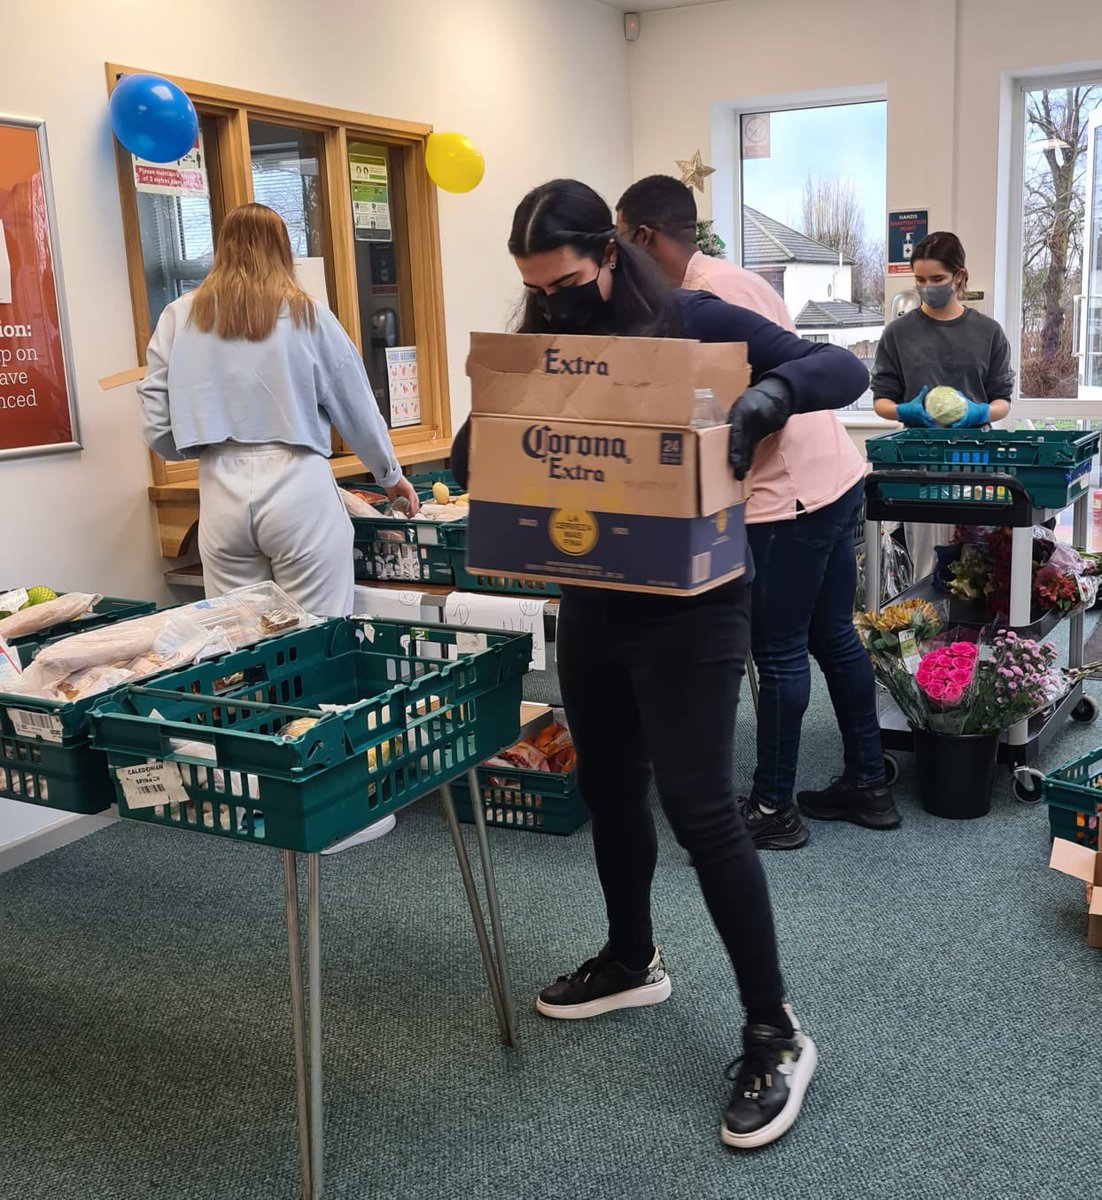 Day 2 and over 150 meals delivered as well as 200 cakes and treats 🧁 we delivered hot meals to the families who need them most in Havering as well as Christmas treats to our local hospital 🏥 we go again tomorrow 💪🏽 #EndChildFoodPoverty @MarcusRashford